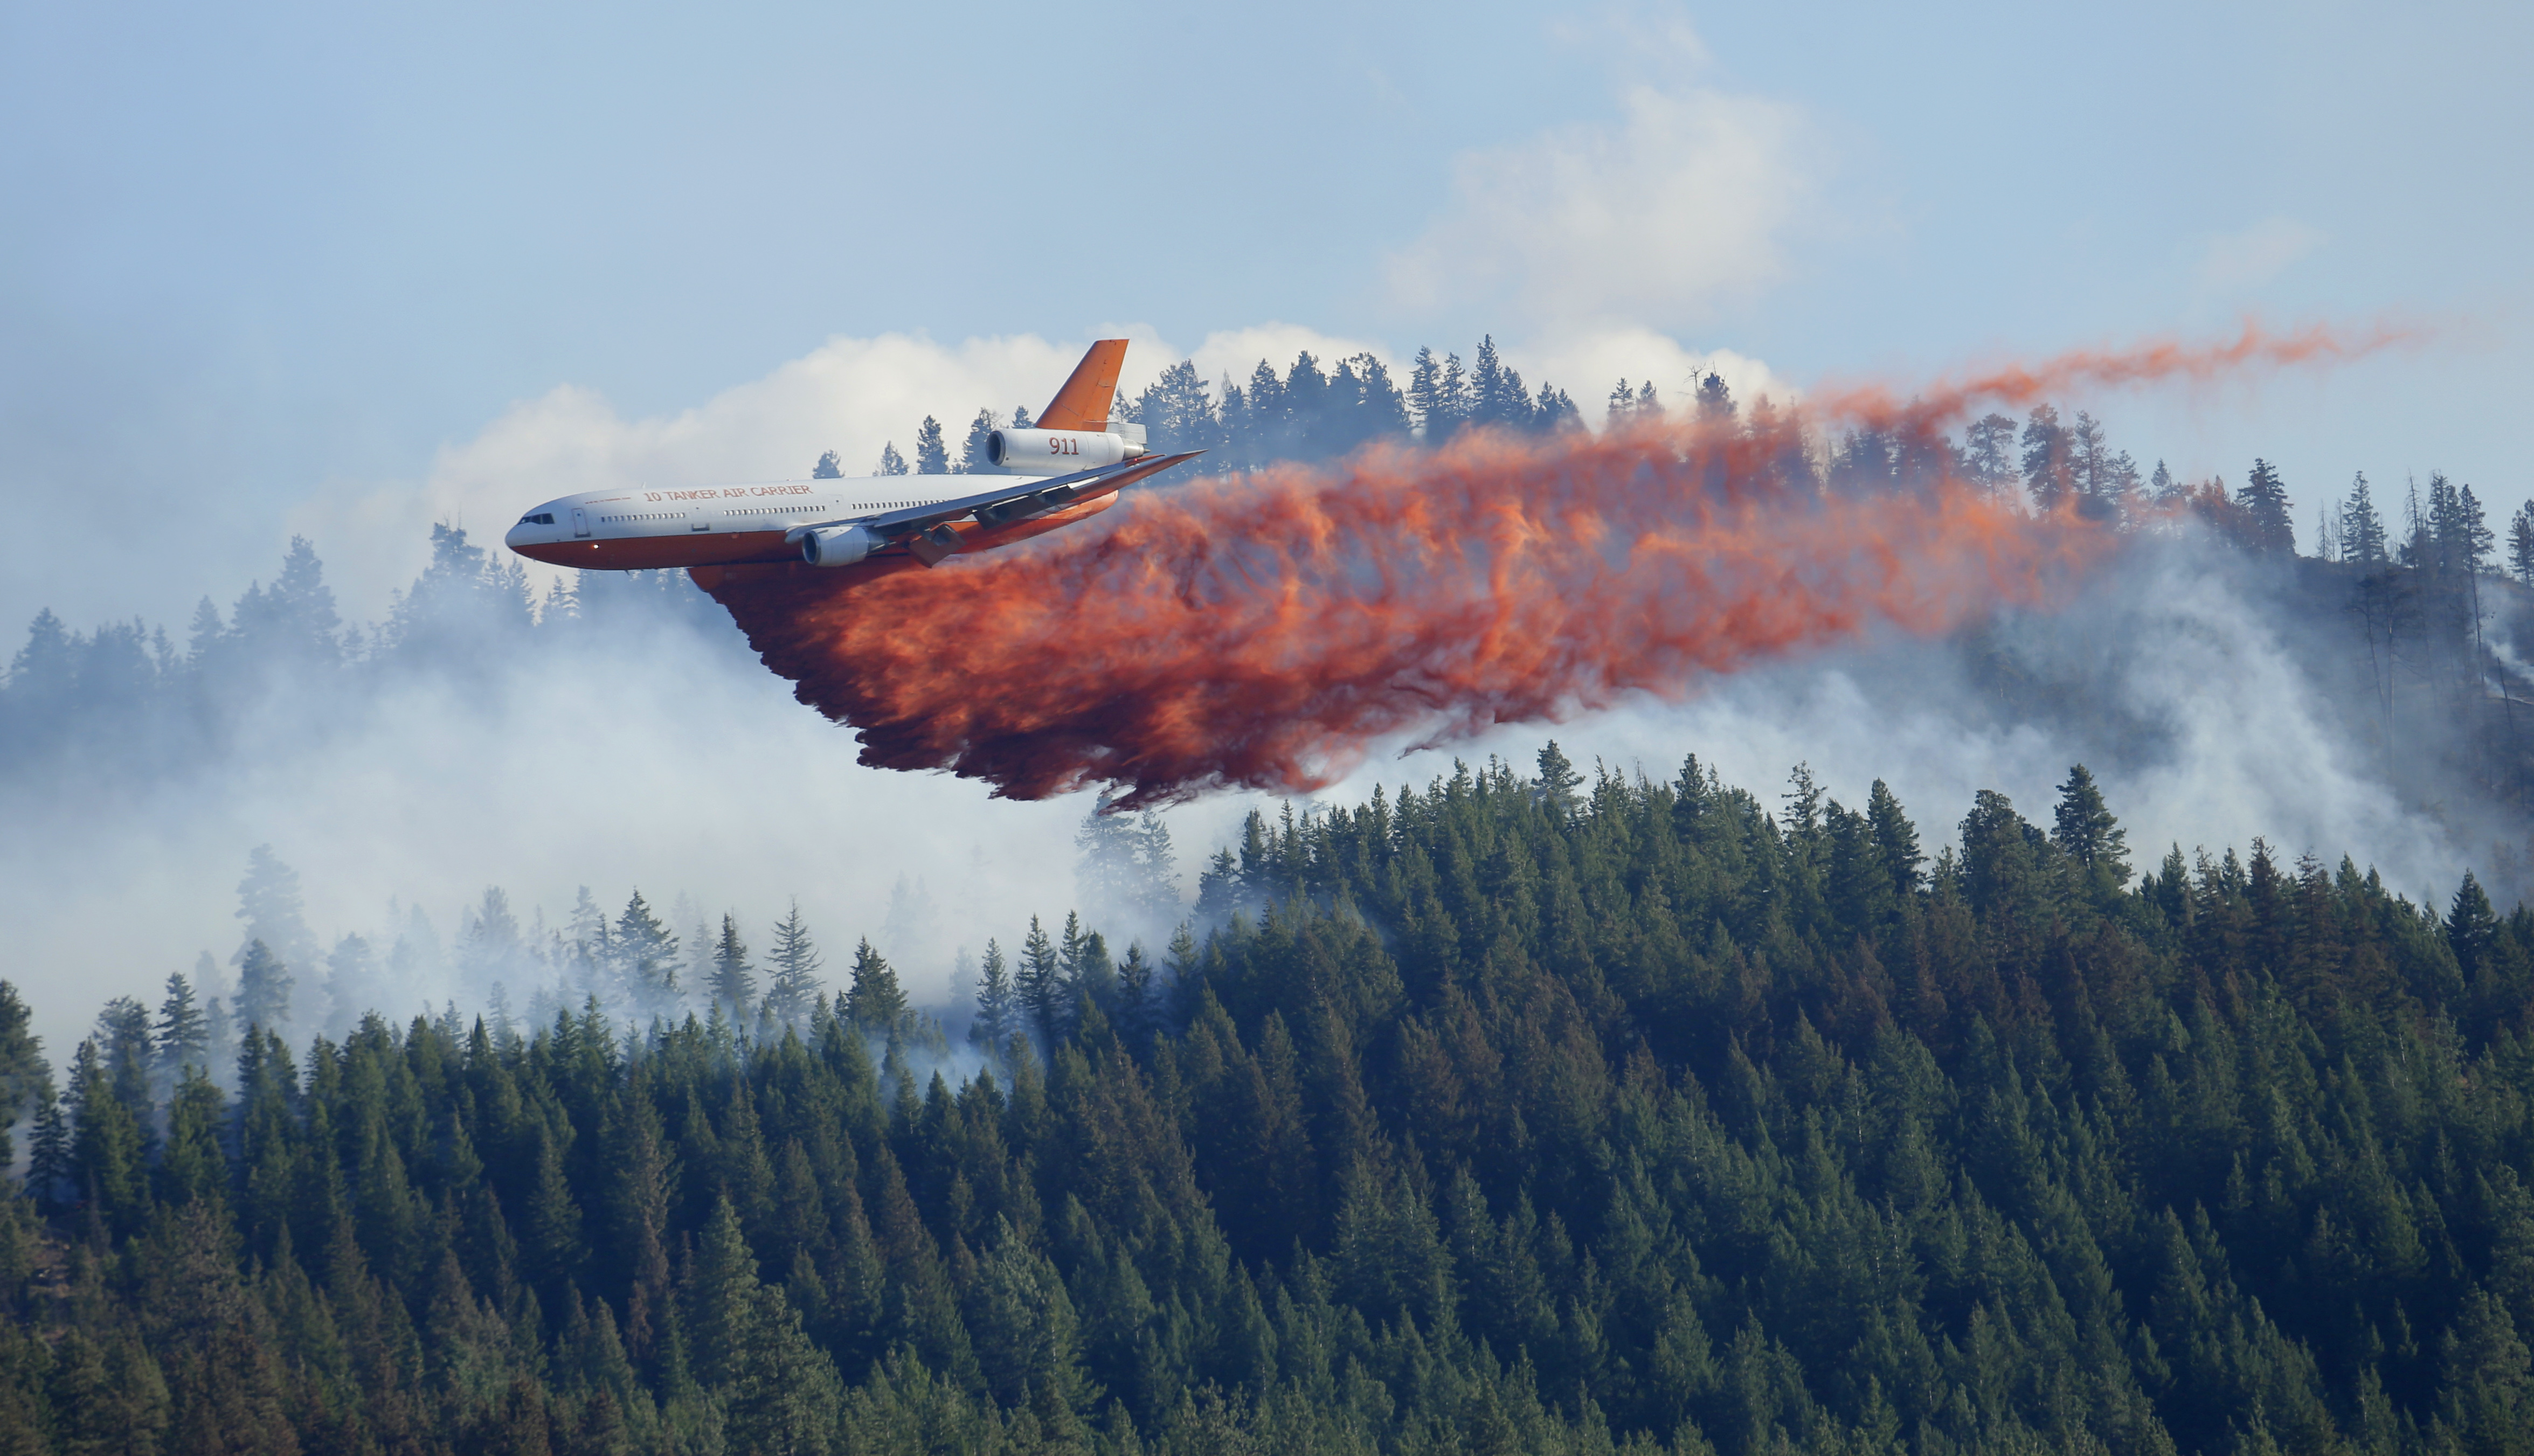 A DC-10 tanker airplane drops fire retardant on a wildfire north of Twisp in Okanogan County on Friday. The Associated Press (Click on image to enlarge)